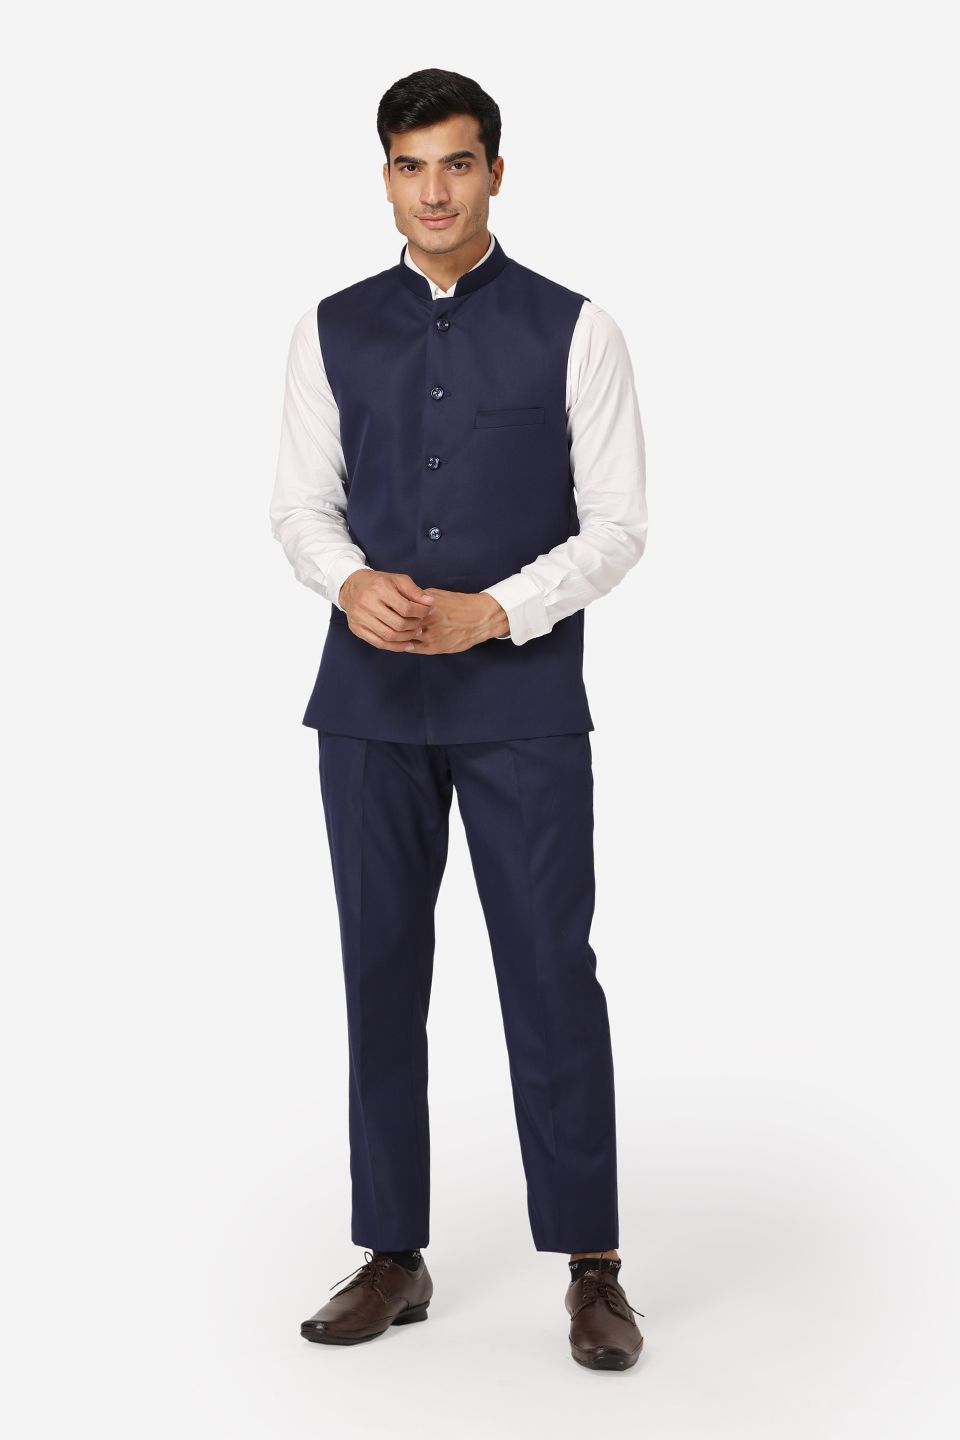 WINTAGE Men's Poly Cotton Casual and Evening Vest & Pant Set : Navy Blue